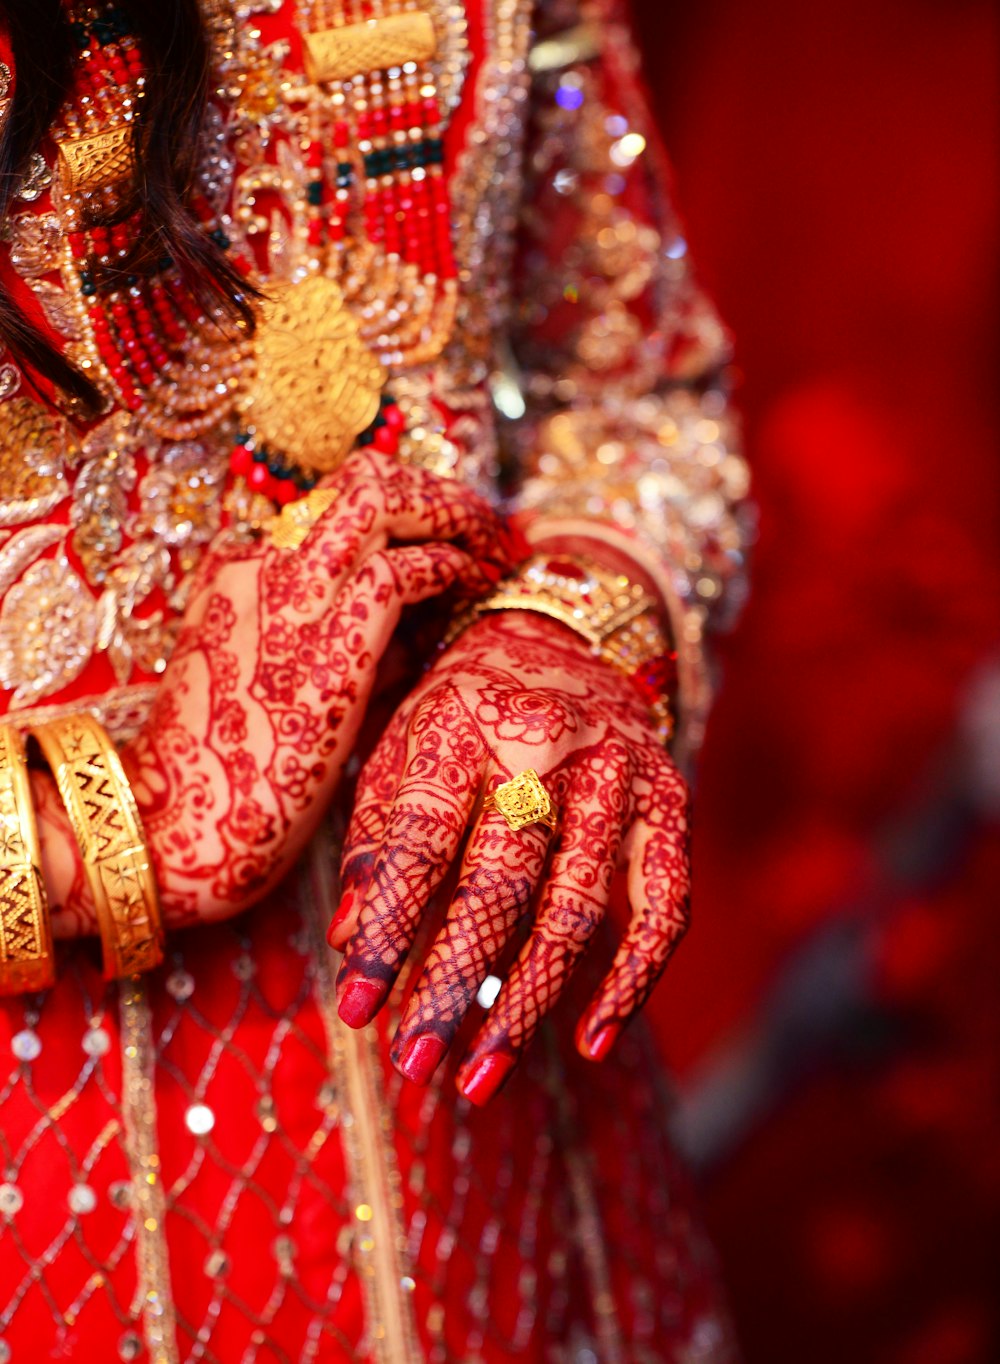 a close up of a person wearing a red and gold outfit